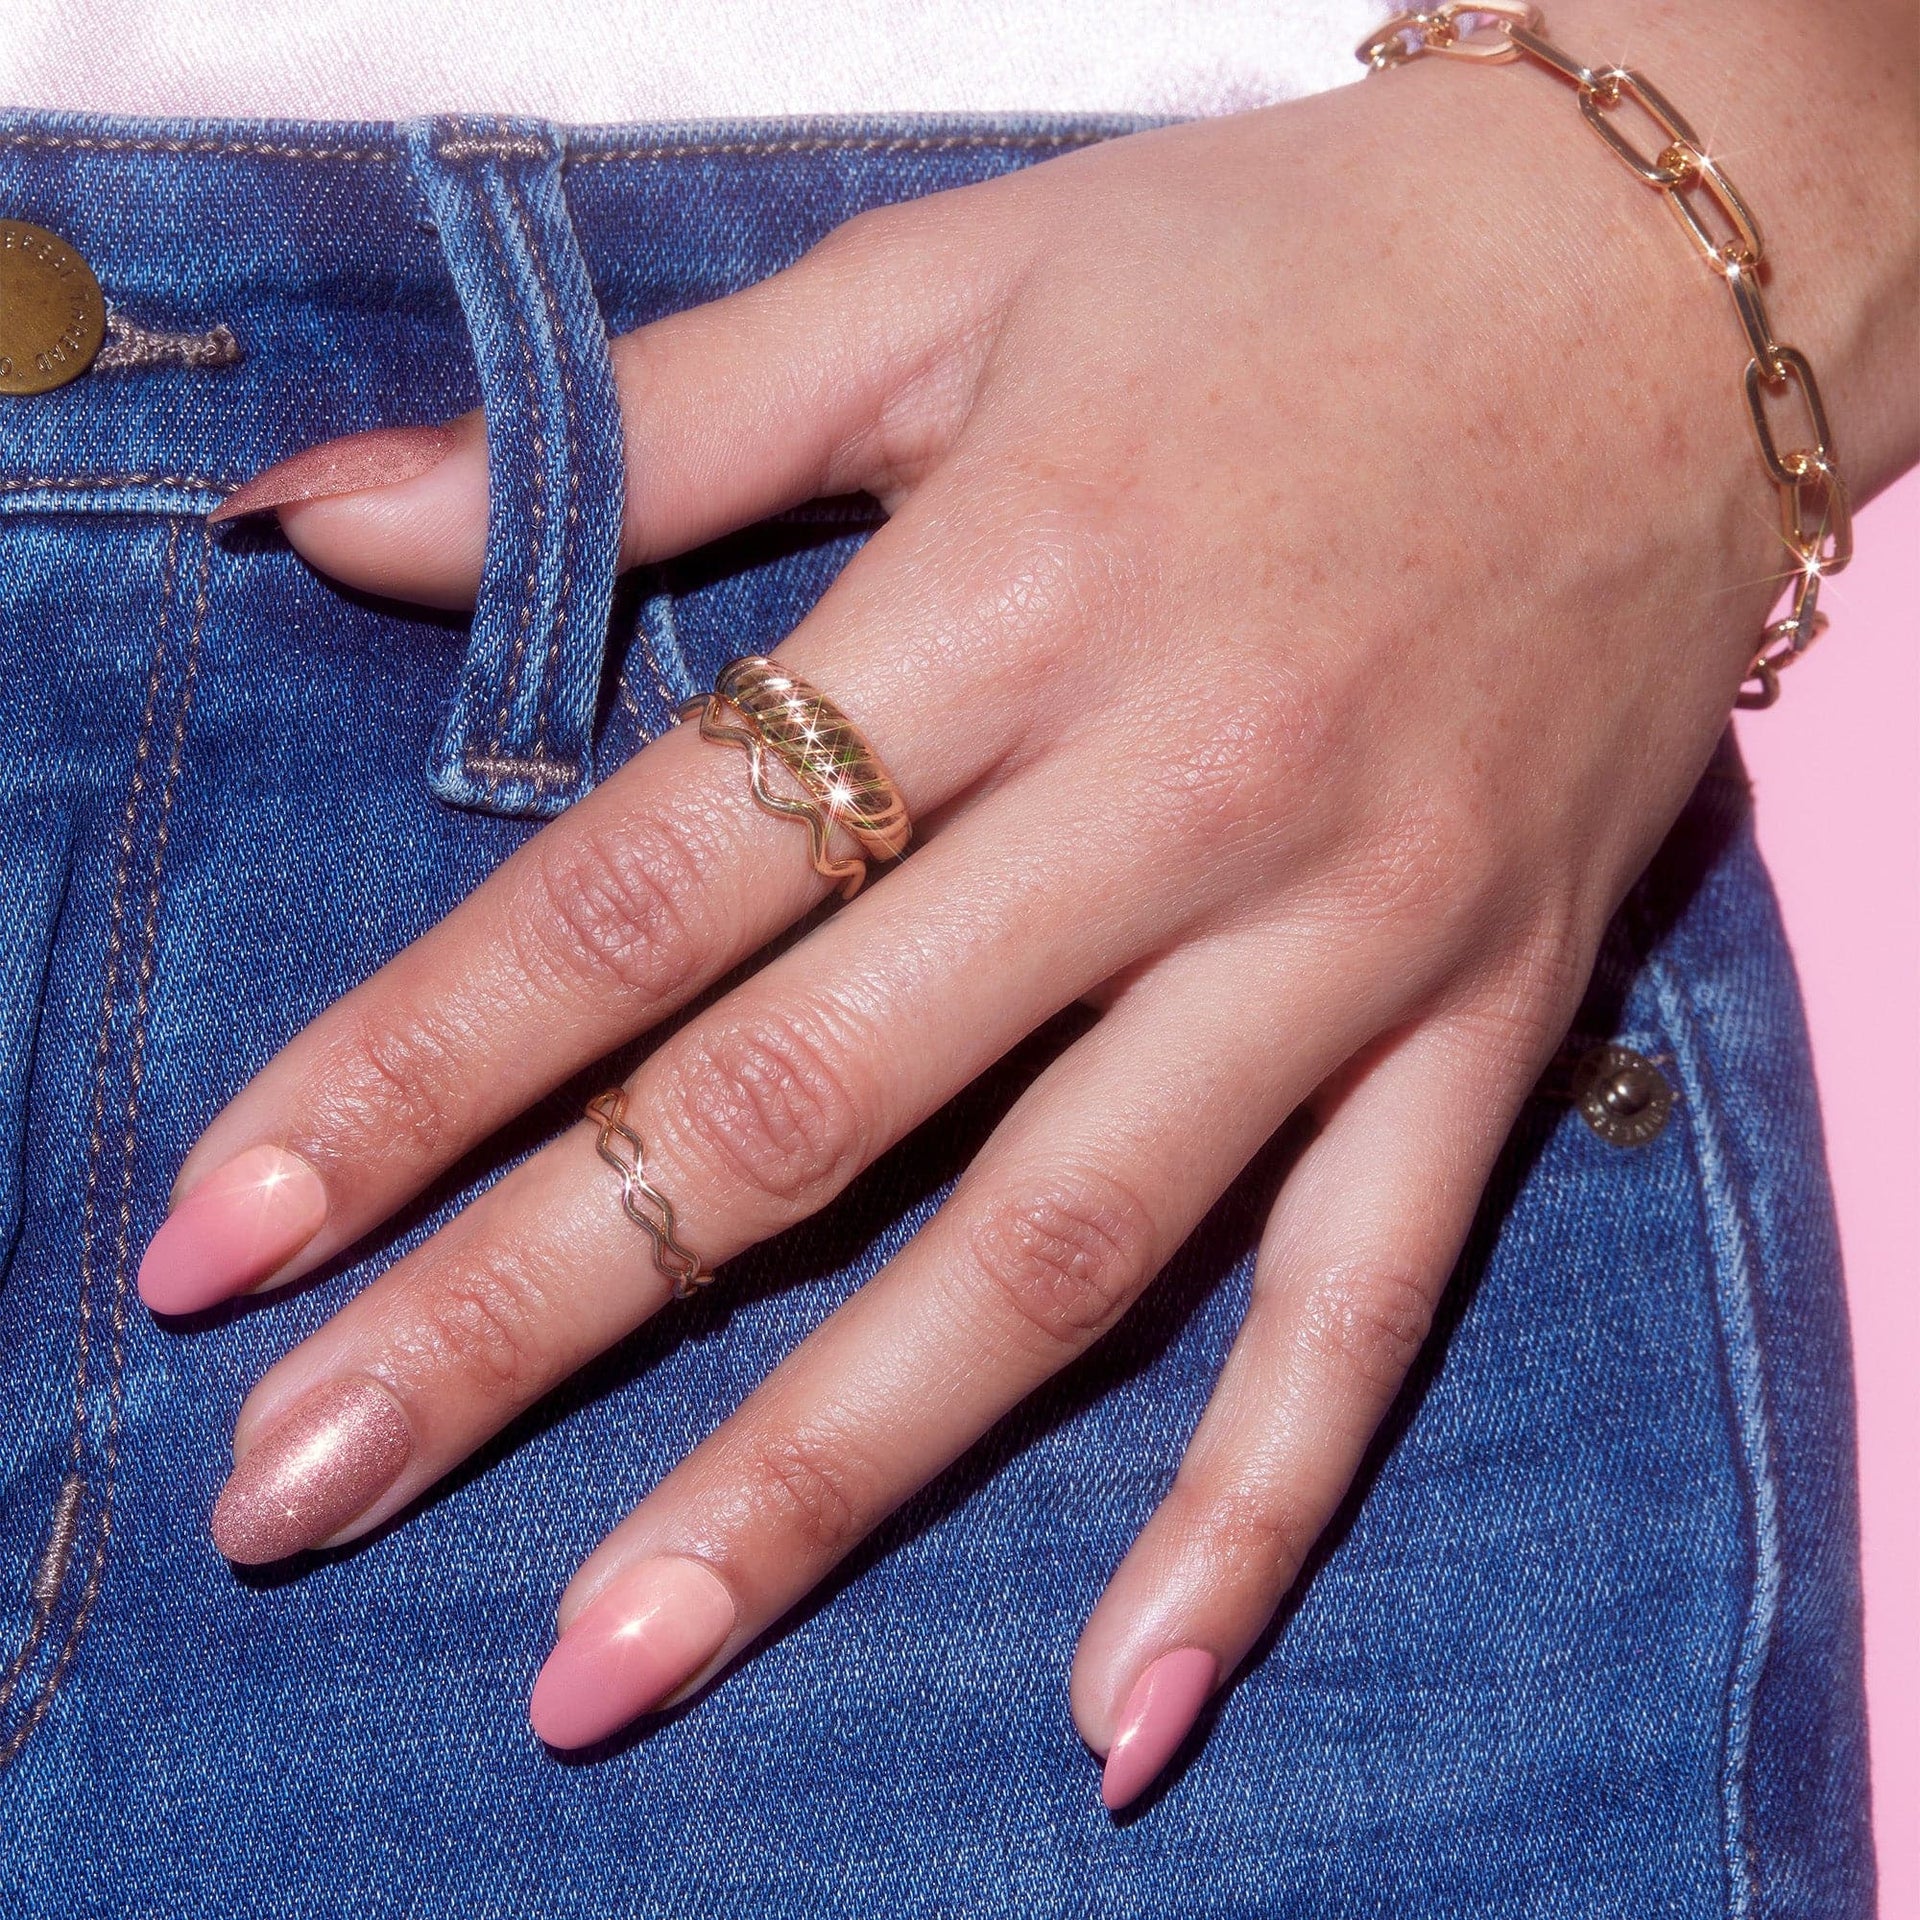 Luxe Shine Fave Nail Tips - Excite Me 